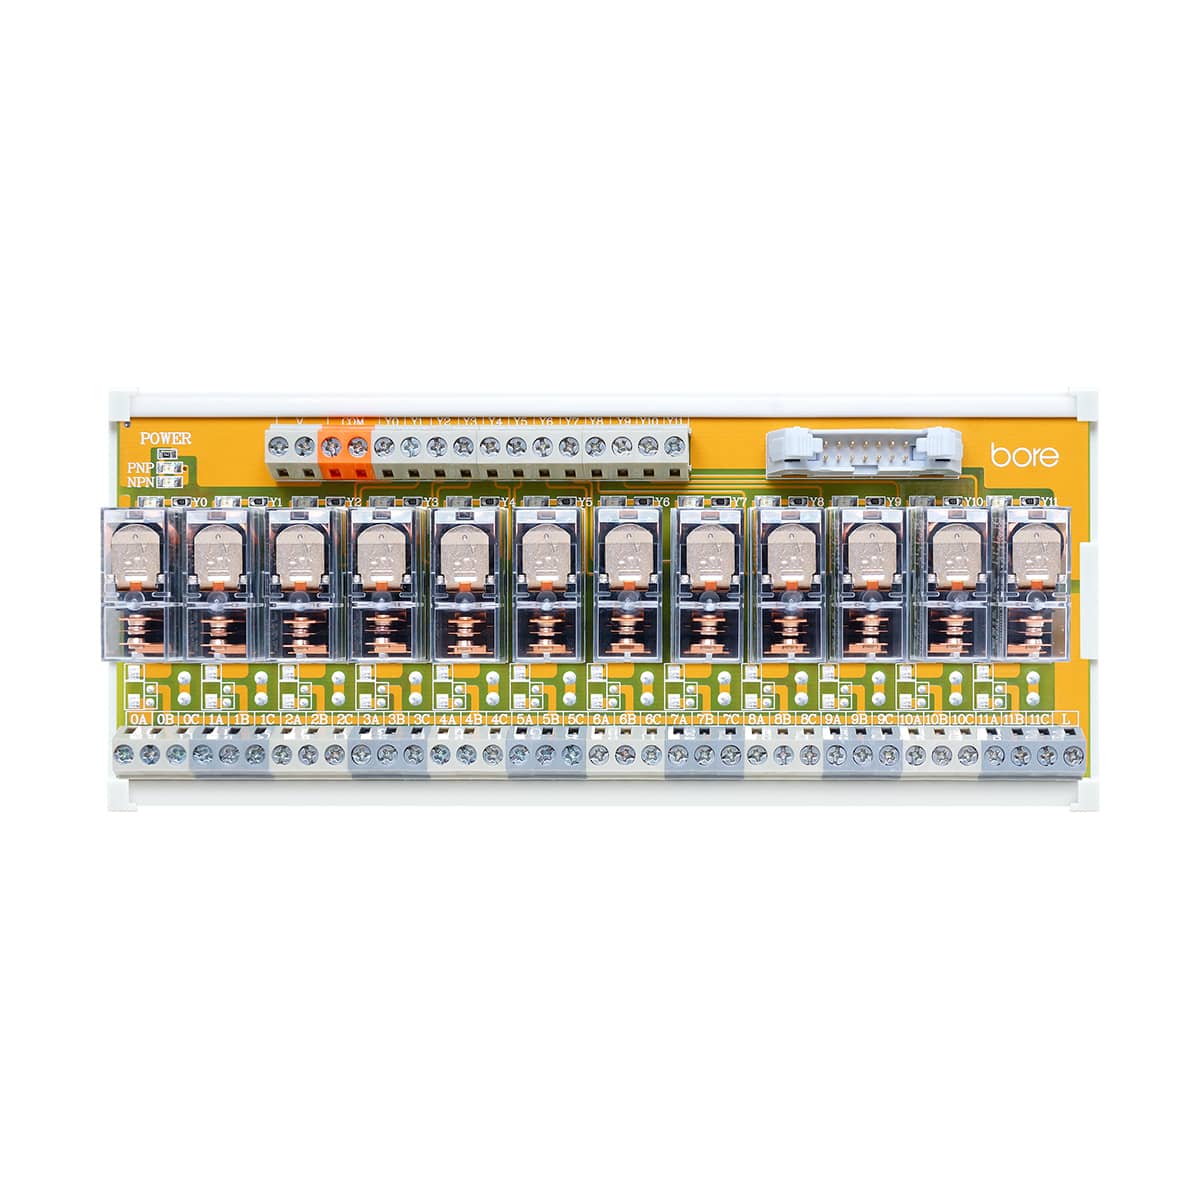 Products|Relay Module G2R-OR12